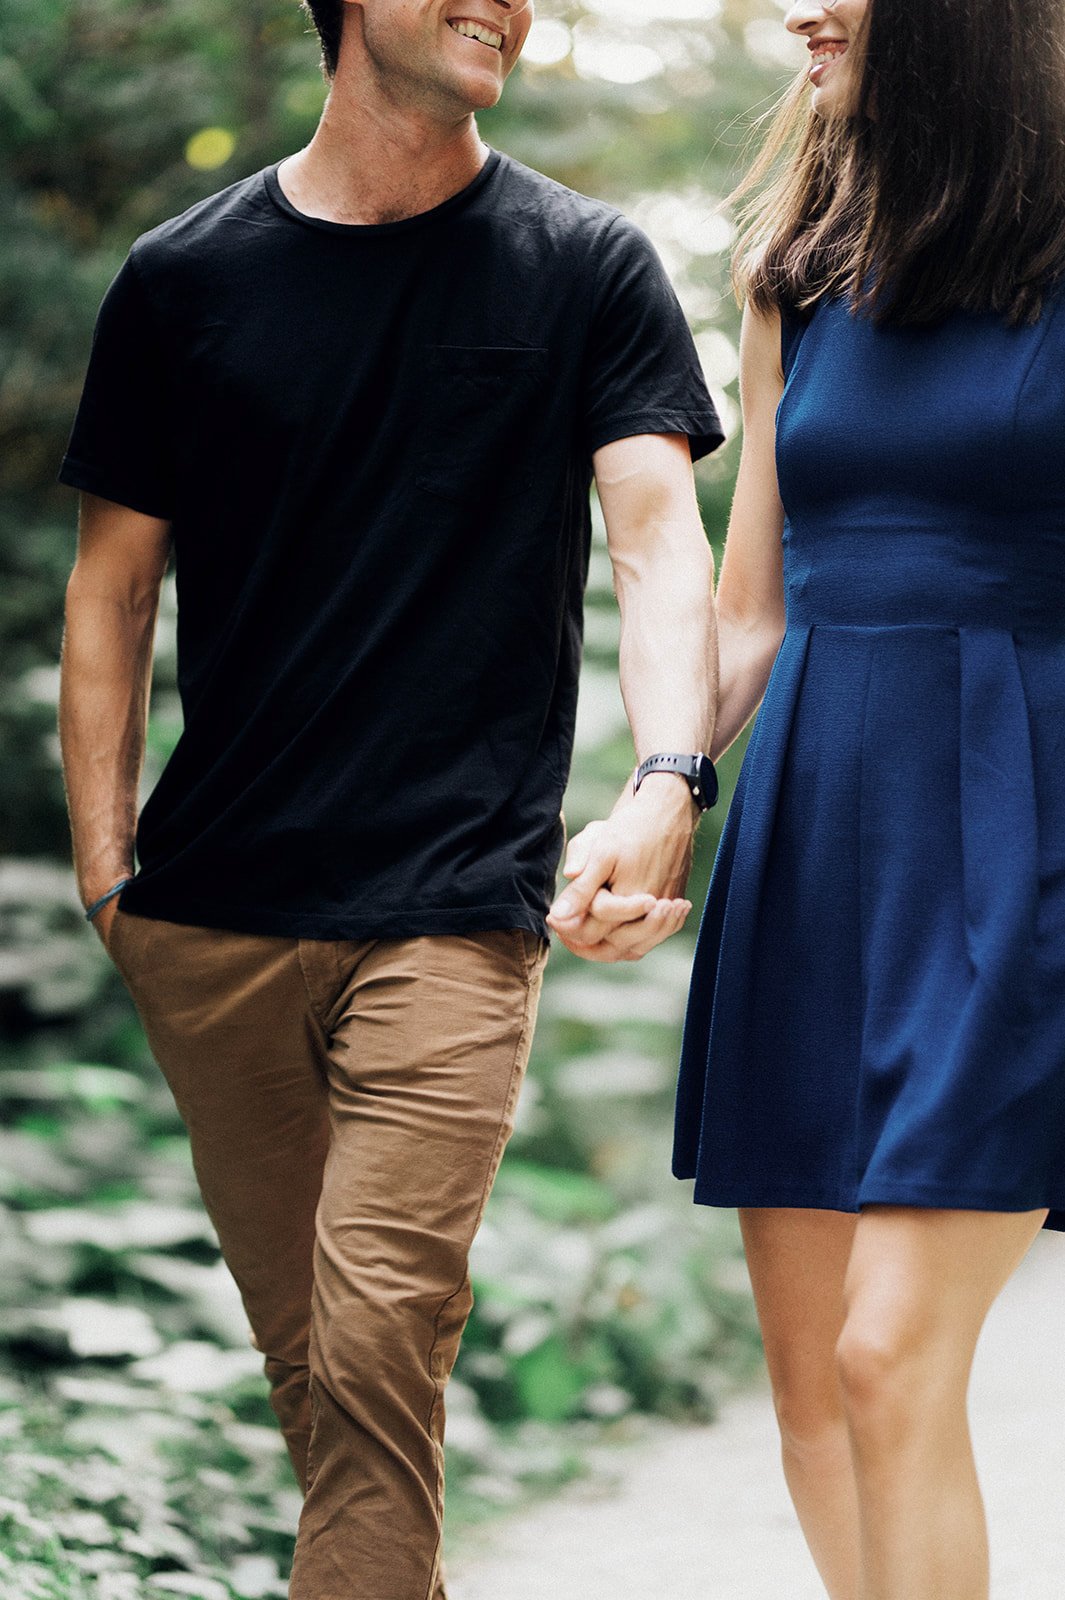 A woman in a blue sundress clutches the hand of her lover as she walks through the woods in Vancouver, BC.